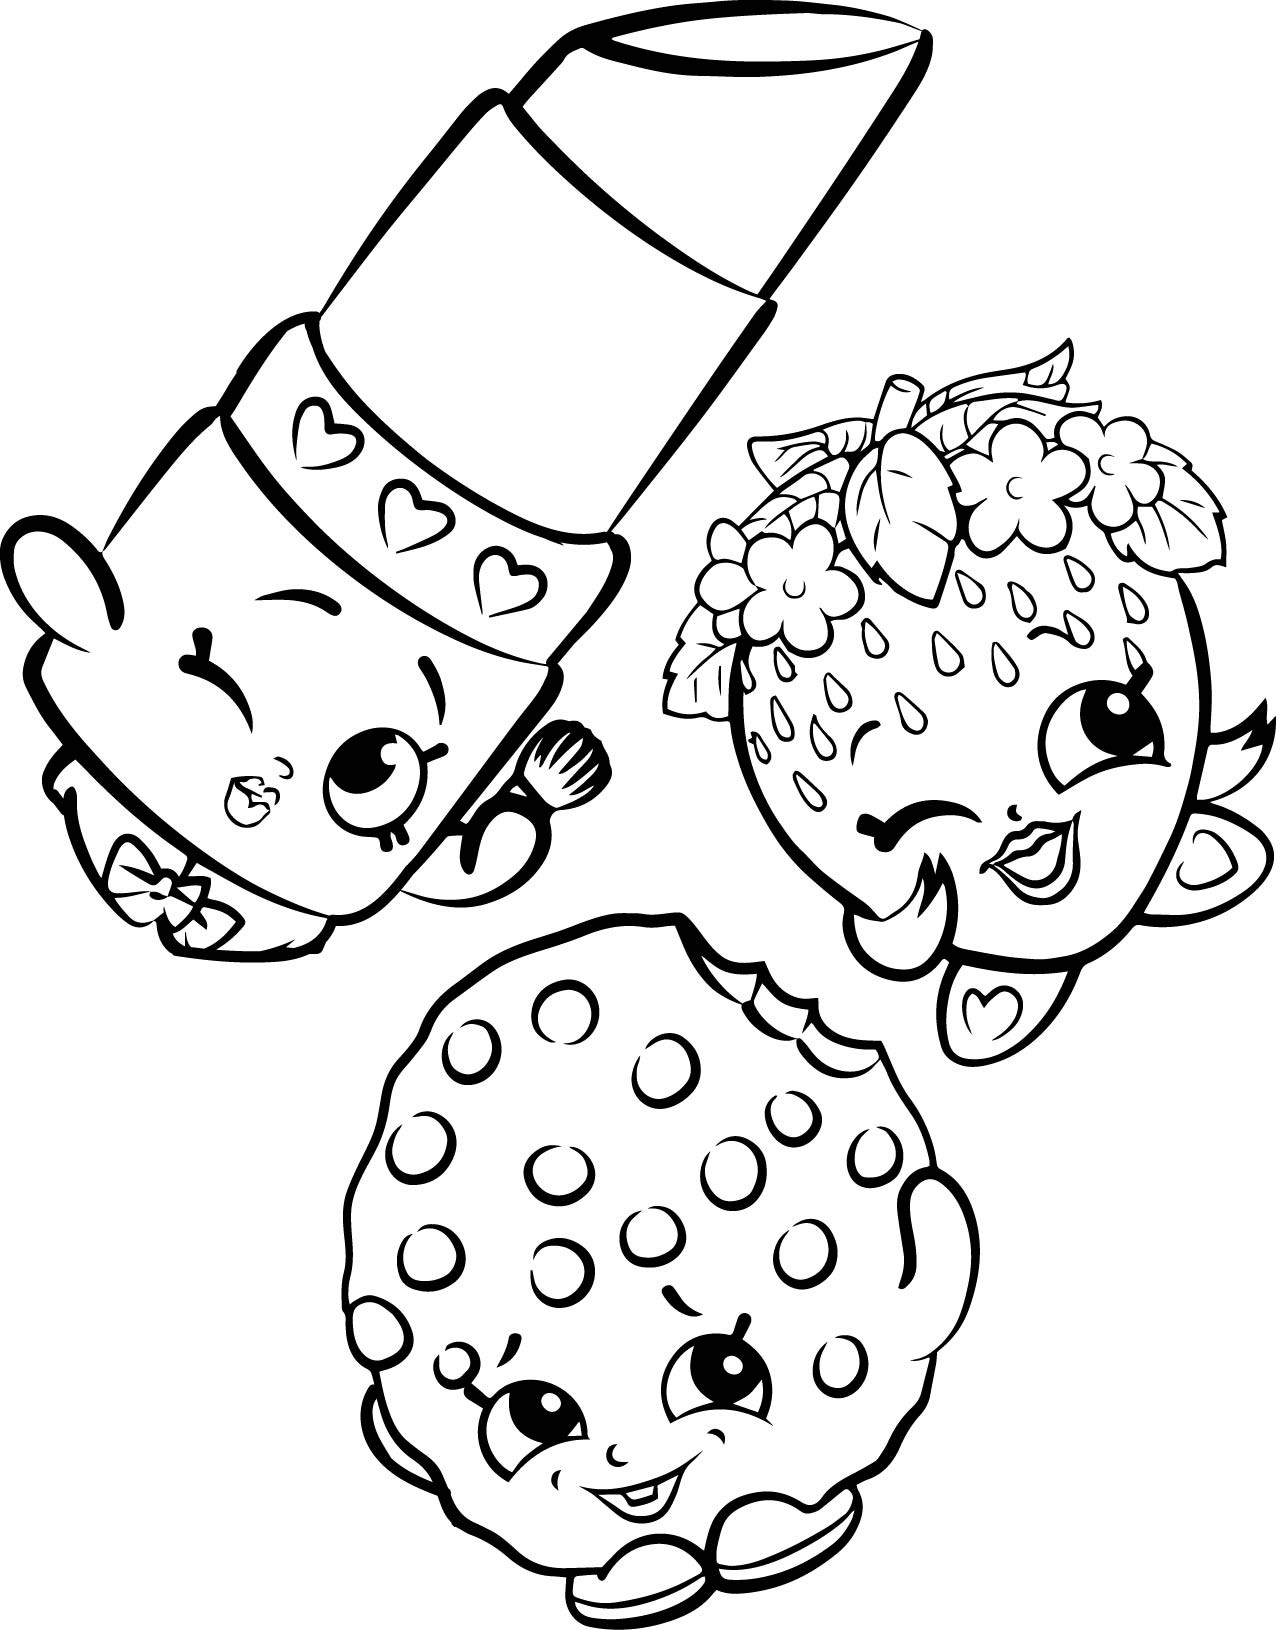 Shopkins Coloring Pages To Print
 Shopkins Coloring Pages Best Coloring Pages For Kids